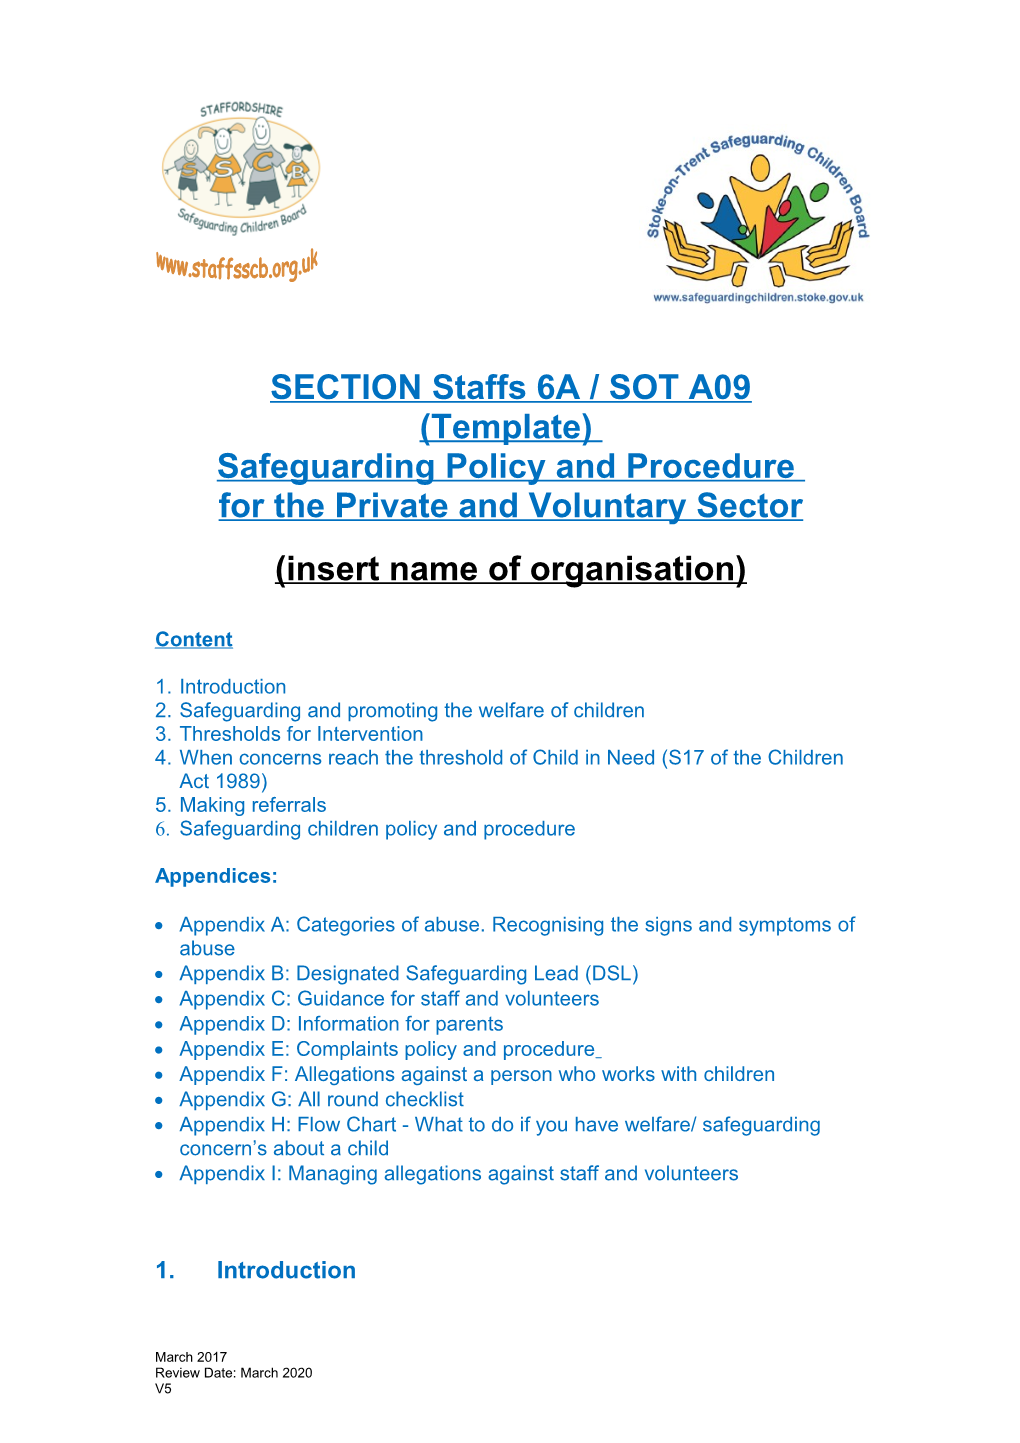 Section 6A Safeguarding Children Template Policy and Procedure V5 March 2017